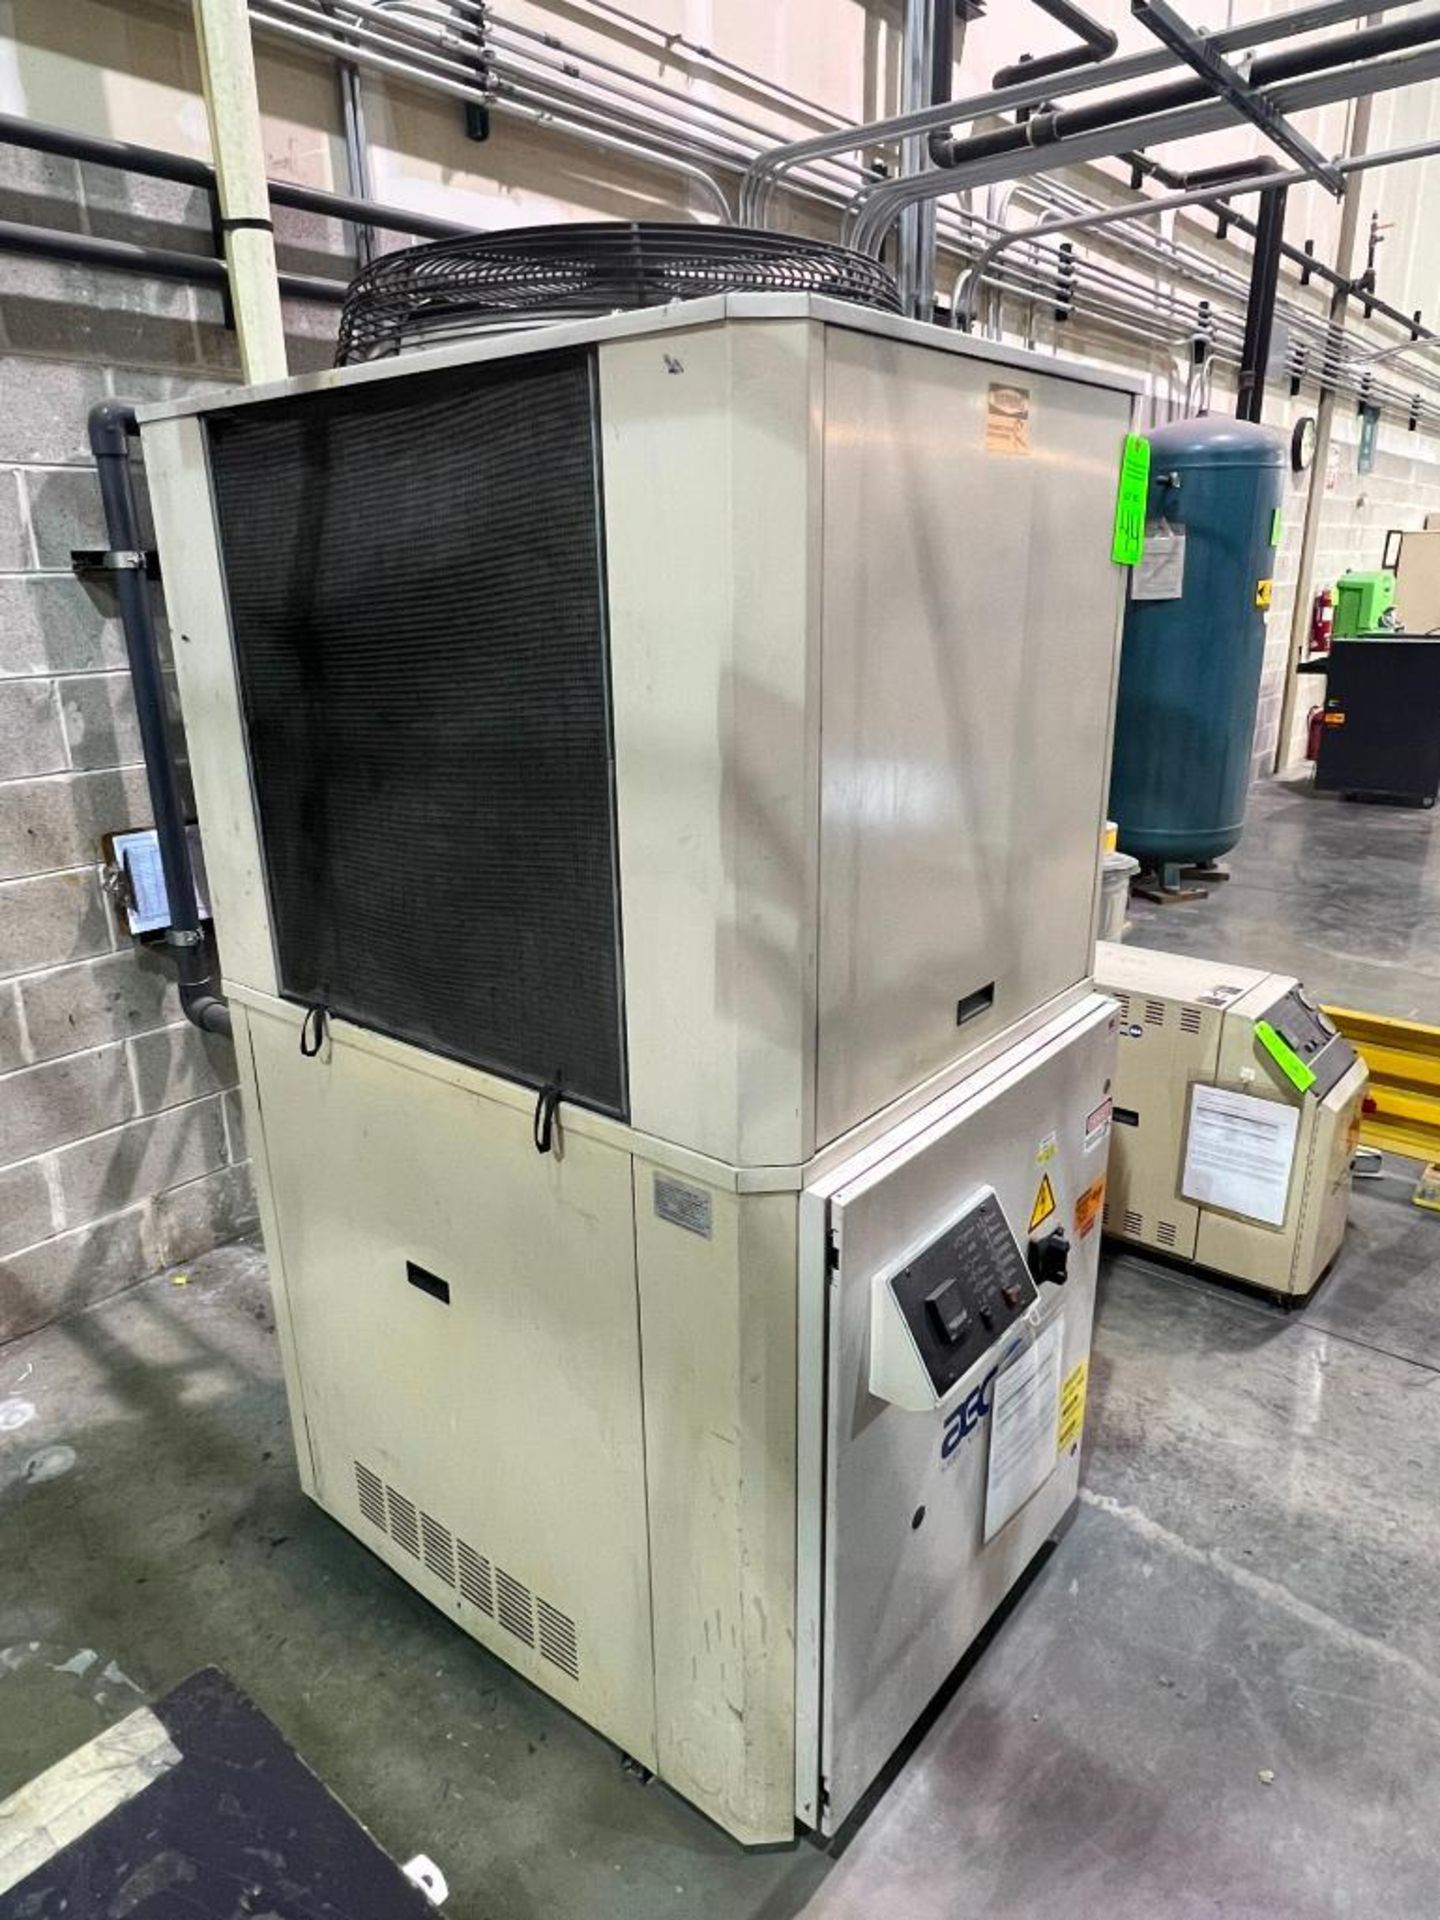 Aec Model Psa-7.5 Portable Air Cooled Chiller - Image 3 of 5